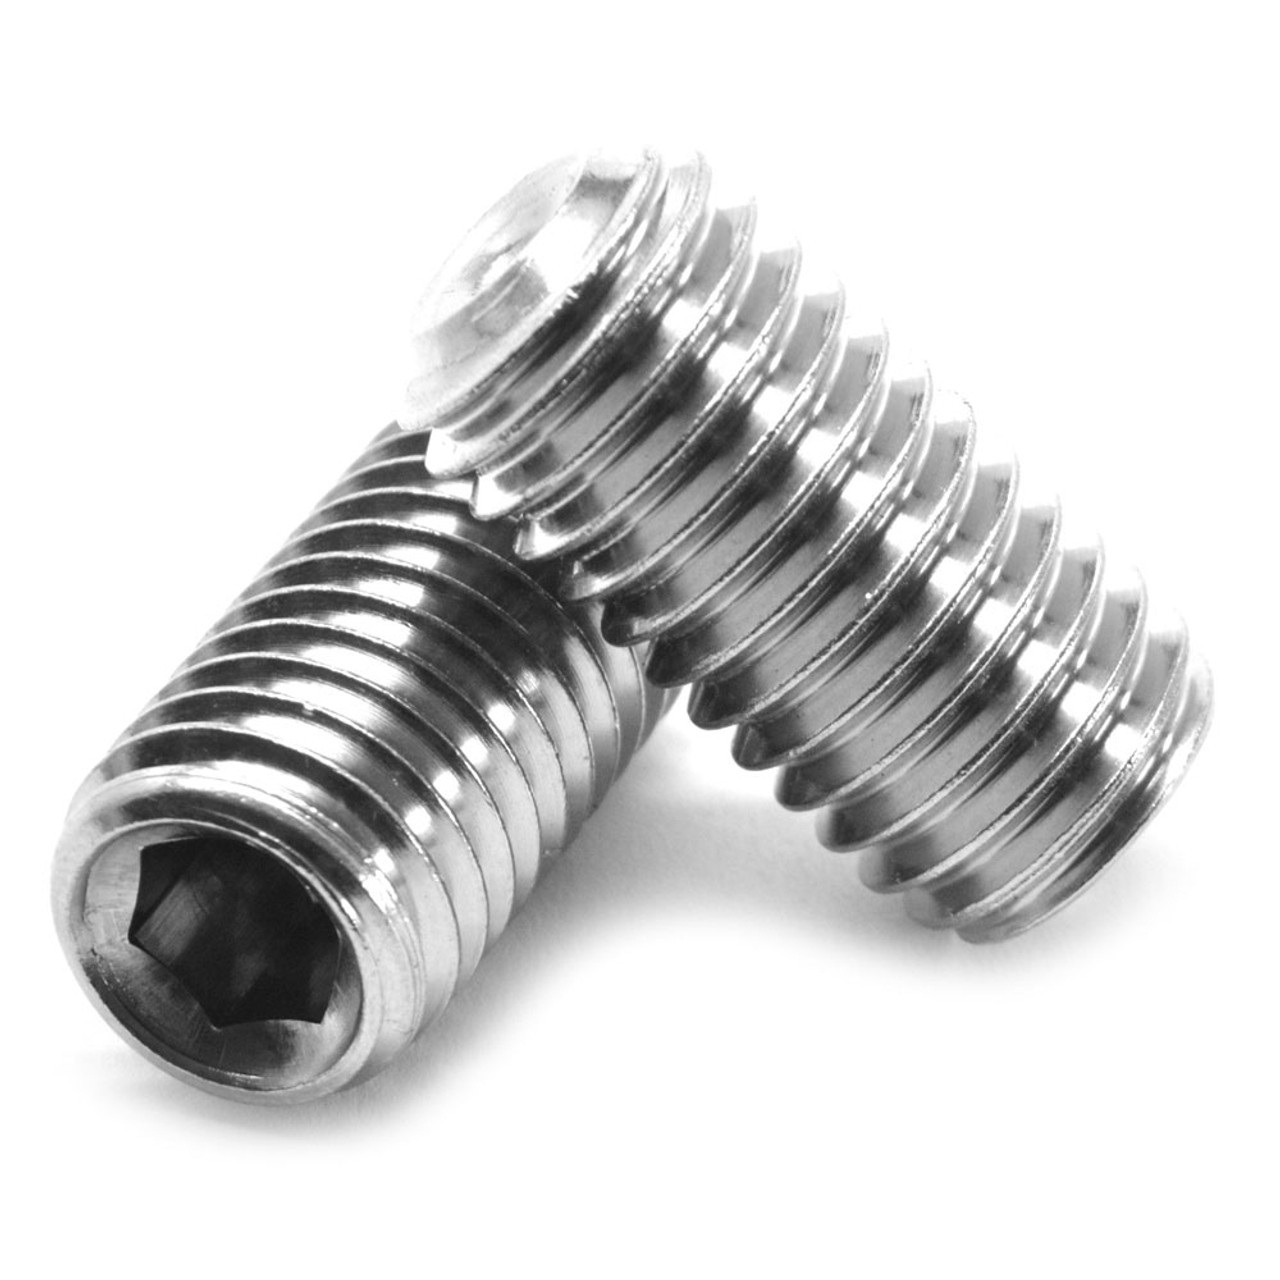 M6 x 1.00 x 40 MM Coarse Thread DIN 916 / ISO 4029 Socket Set Screw Cup Point Stainless Steel 316